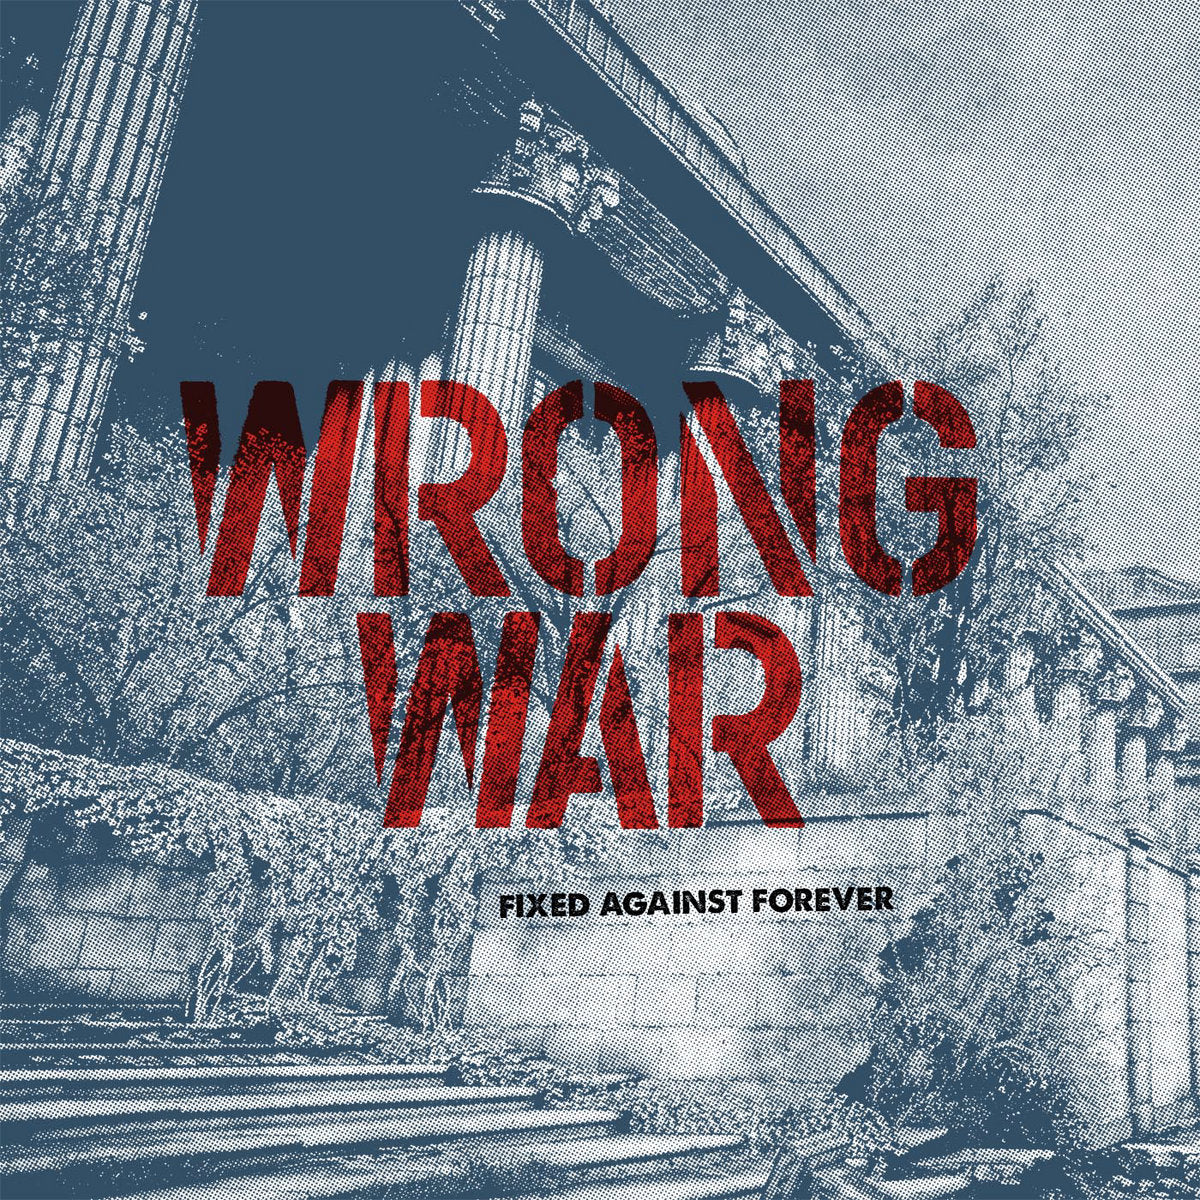 WRONG WAR 'Fixes Against Forever' LP / COLORED EDITION